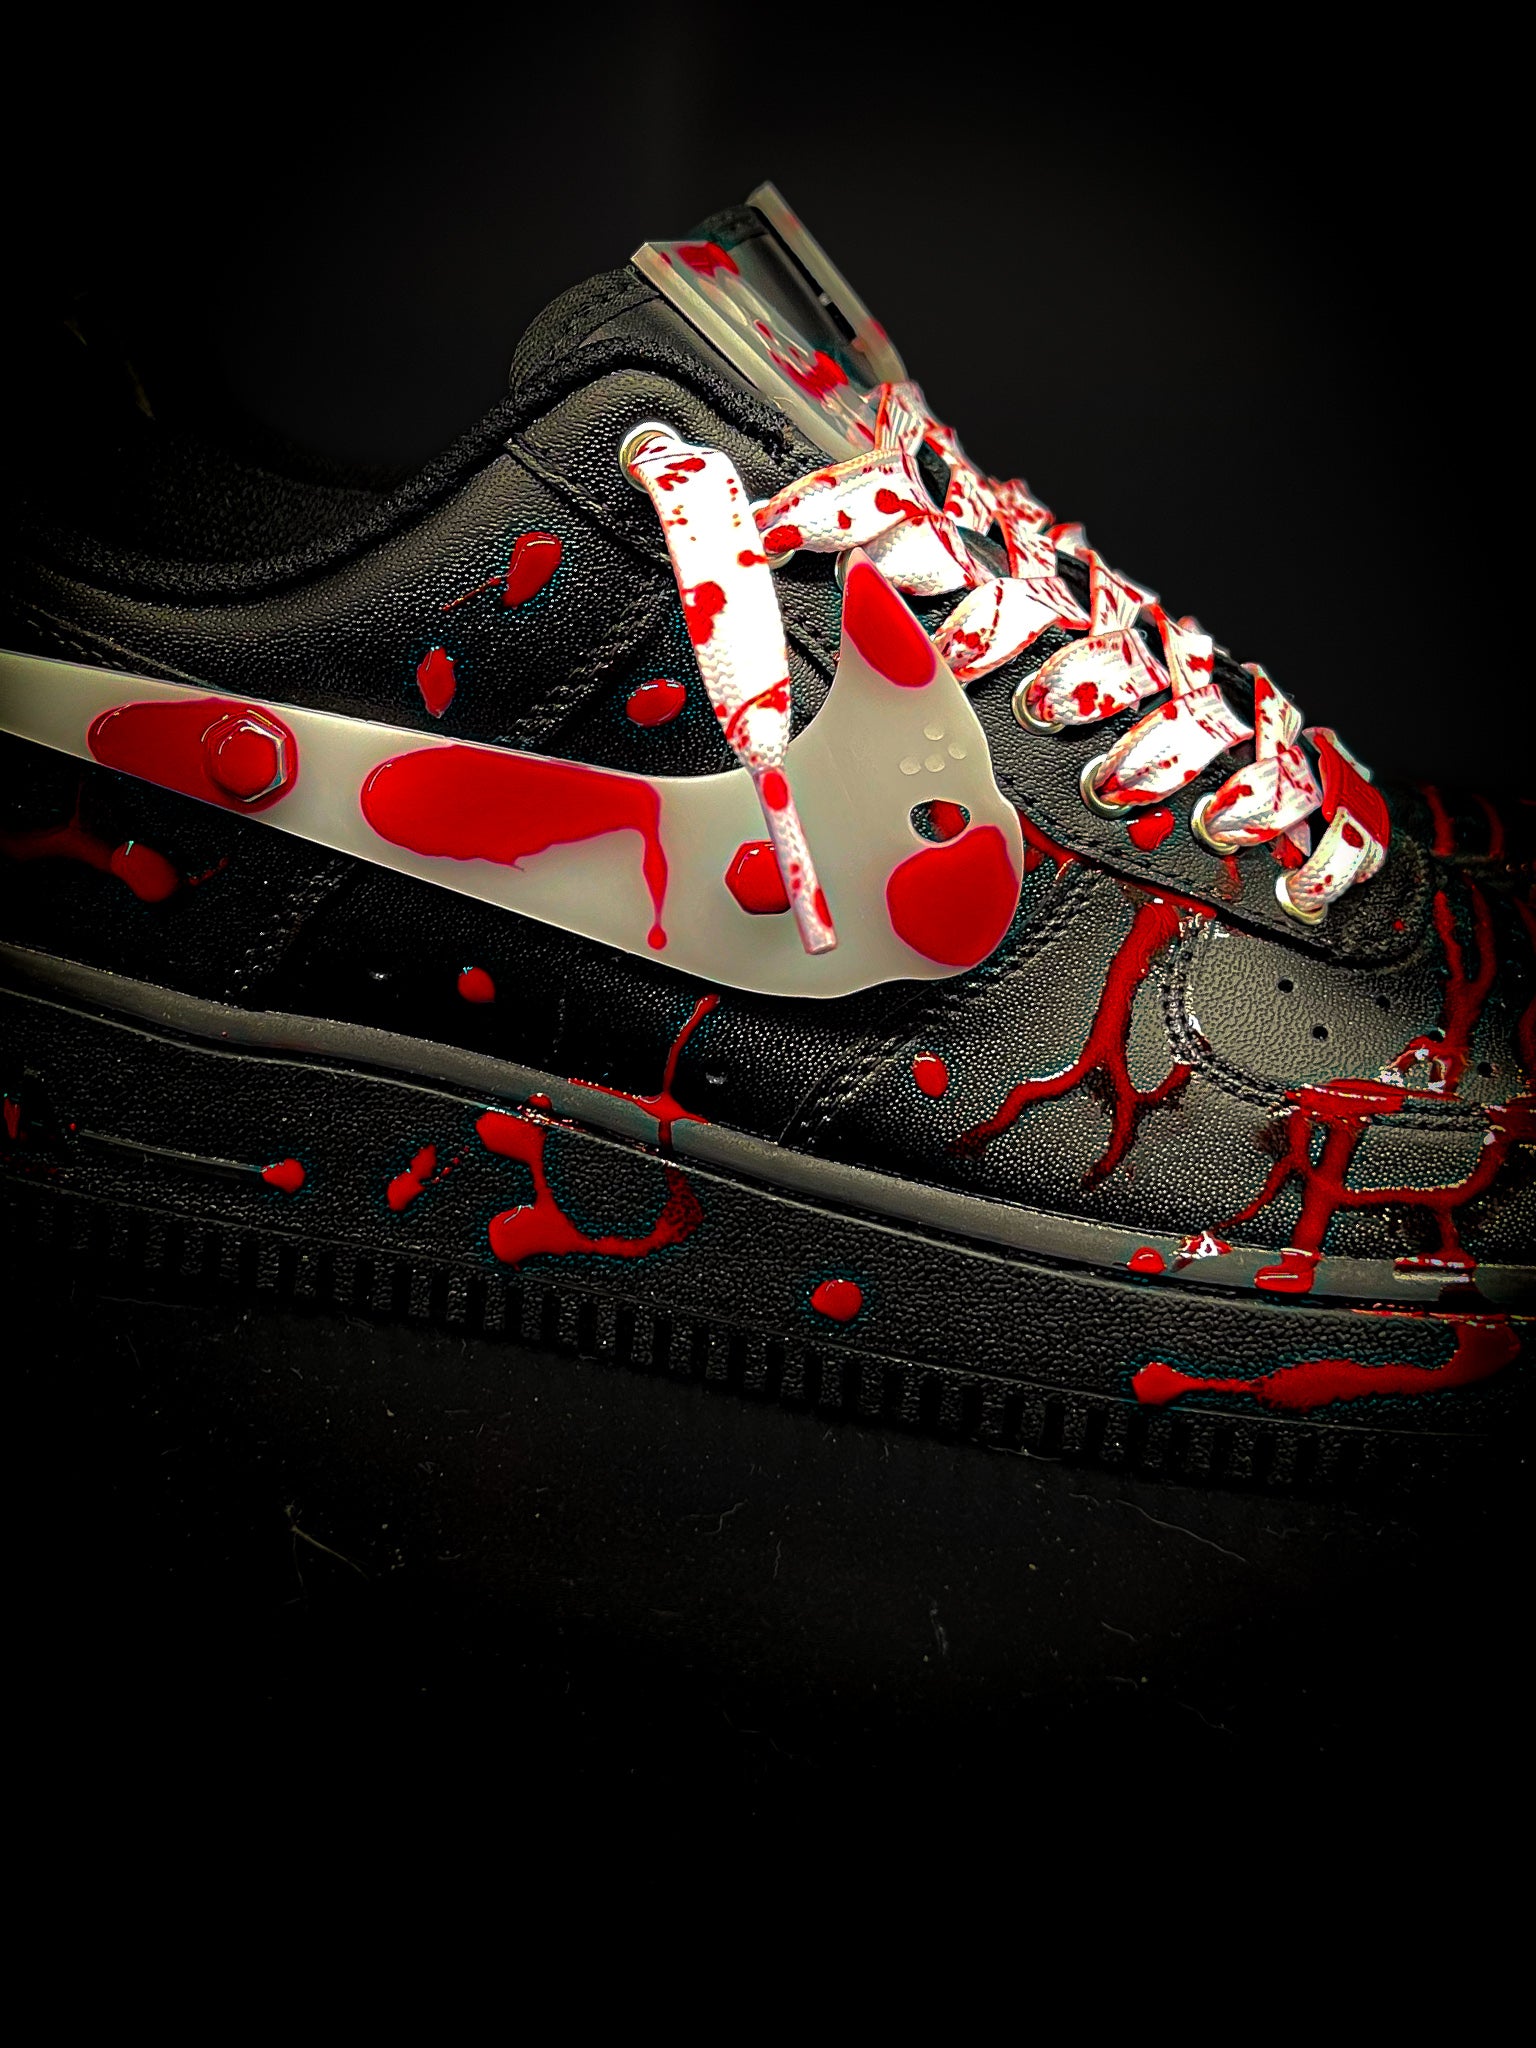 Black Nike Air Forces Drippy Custom Shoes - MAD ALICE